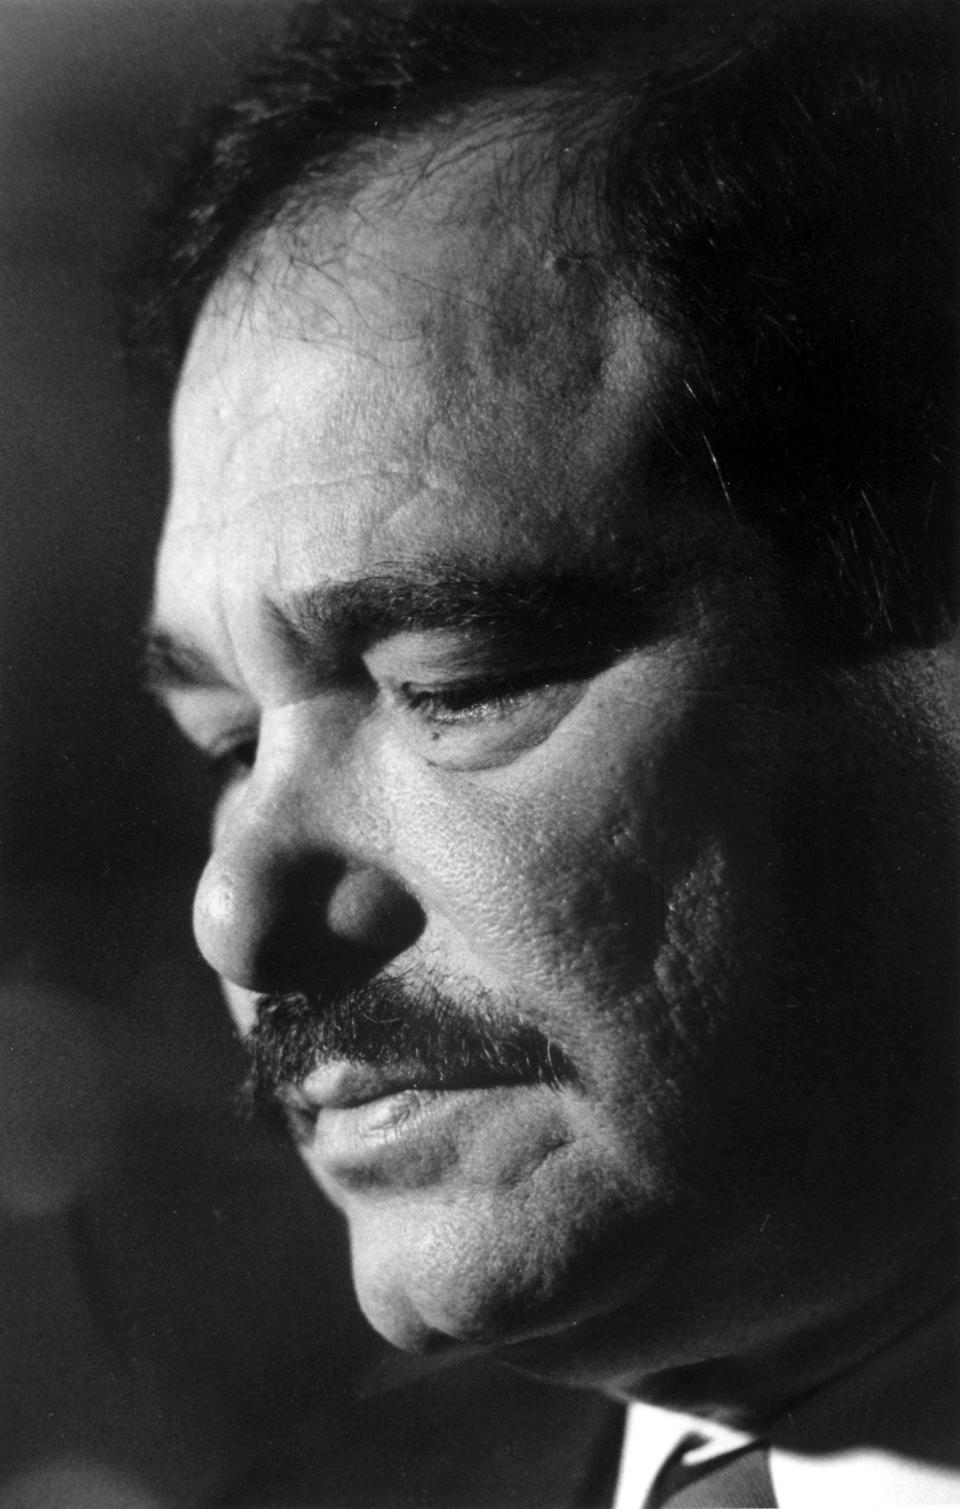 Raul Yzaguirre announces findings of the task force he headed for the Smithsonian on Latino issues in 1994. (Bill O'Leary / The Washington Post via Getty Images file)